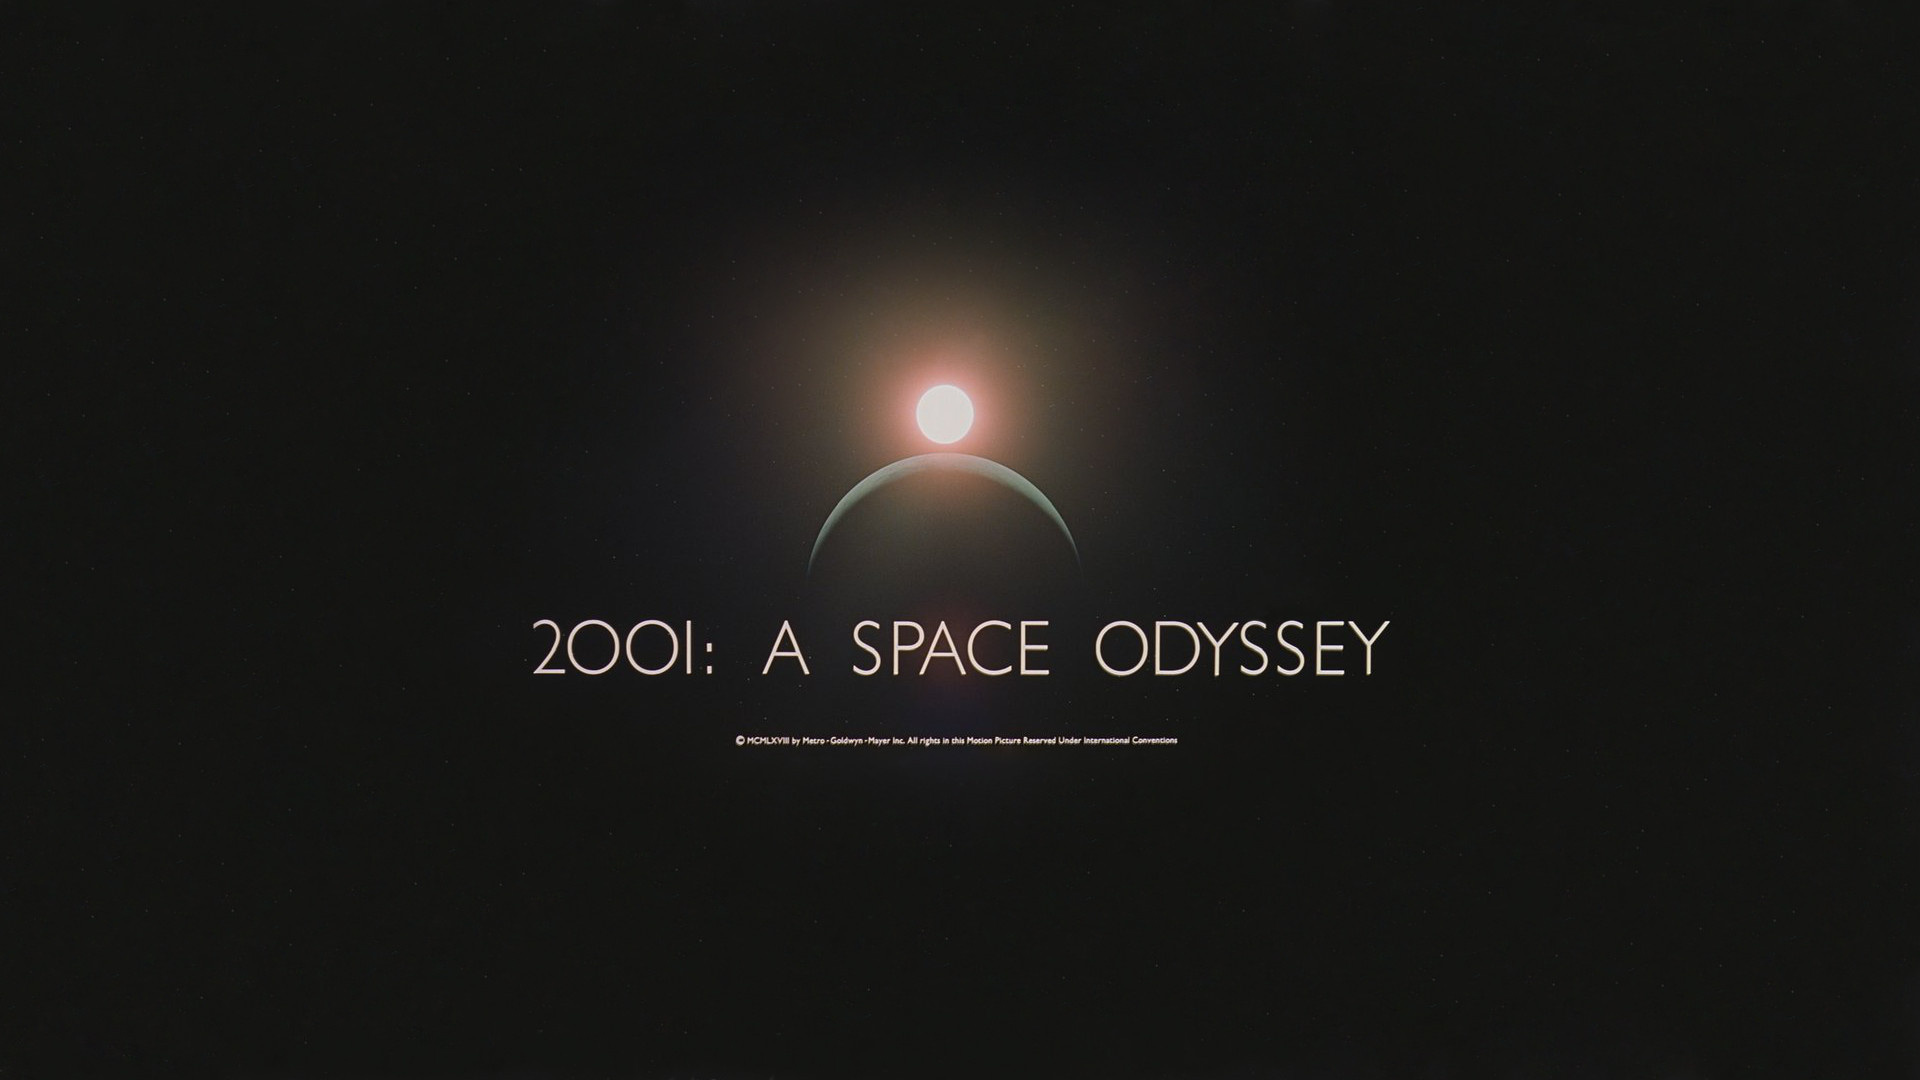 Sci-fi visuals collection, Kubrick's epic, Space Odyssey gallery, Cinematic art, Iconic imagery, 1920x1080 Full HD Desktop